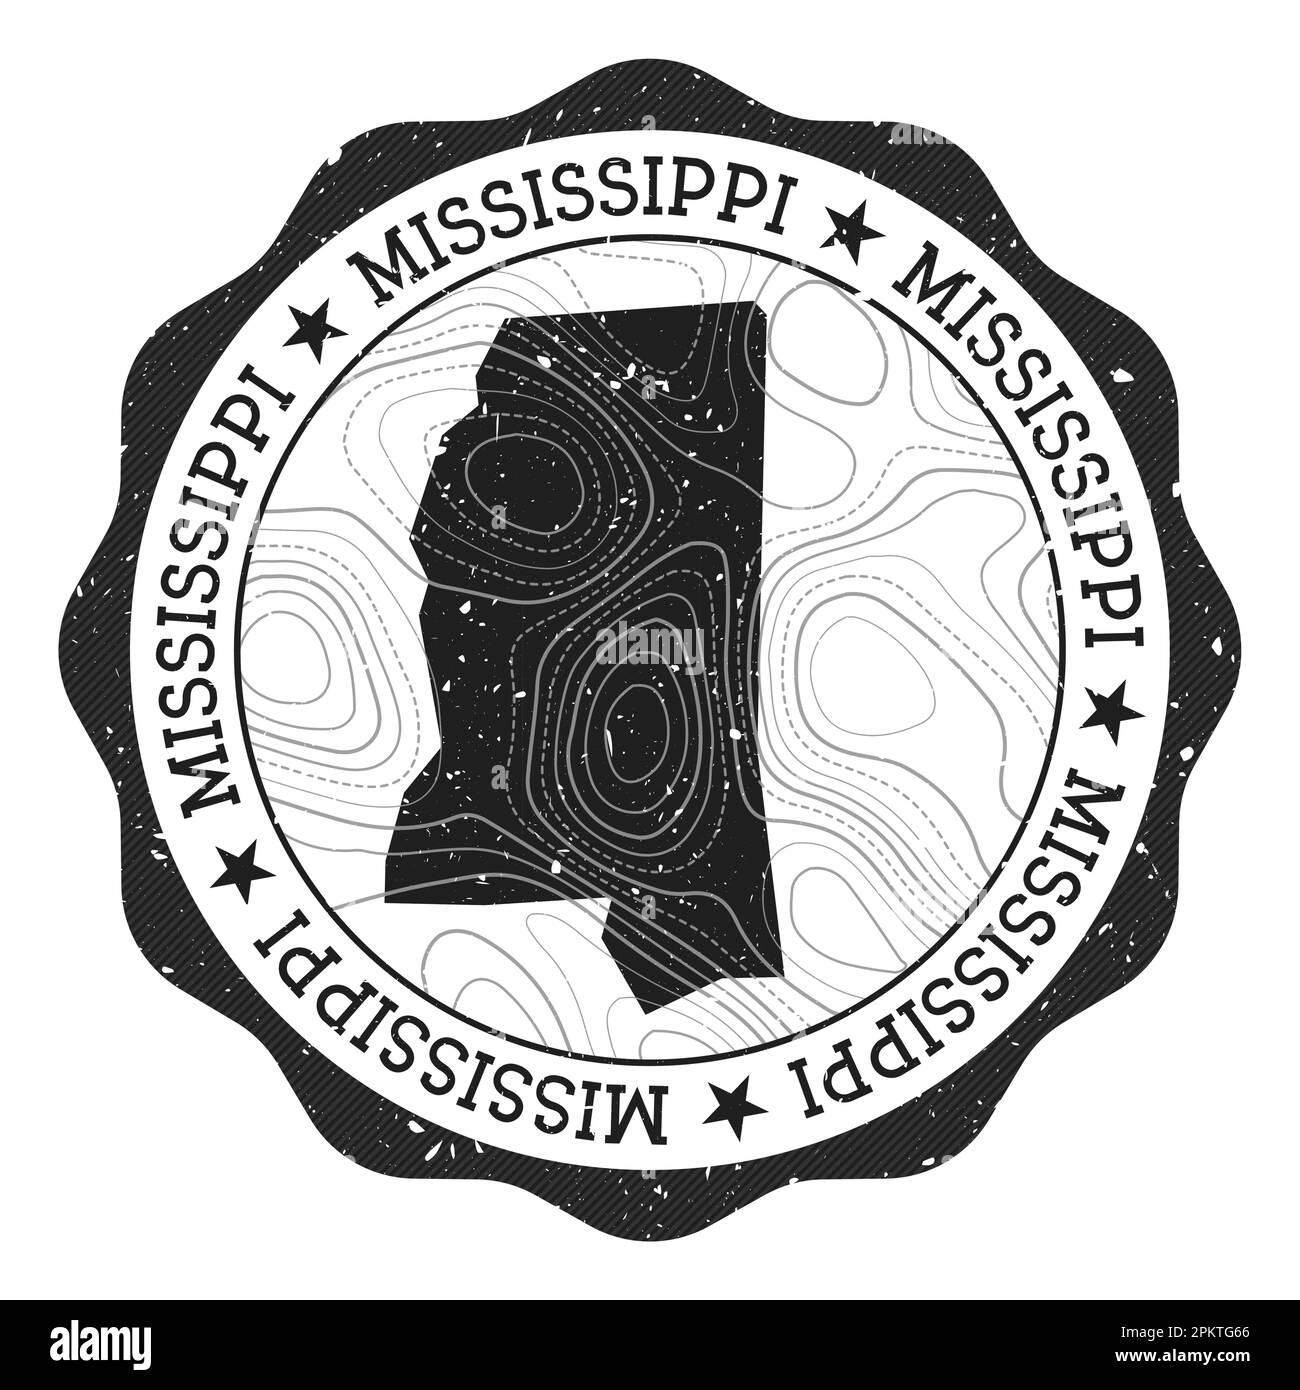 Mississippi outdoor stamp. Round sticker with map of us state with topographic isolines. Vector illustration. Can be used as insignia, logotype, label Stock Vector